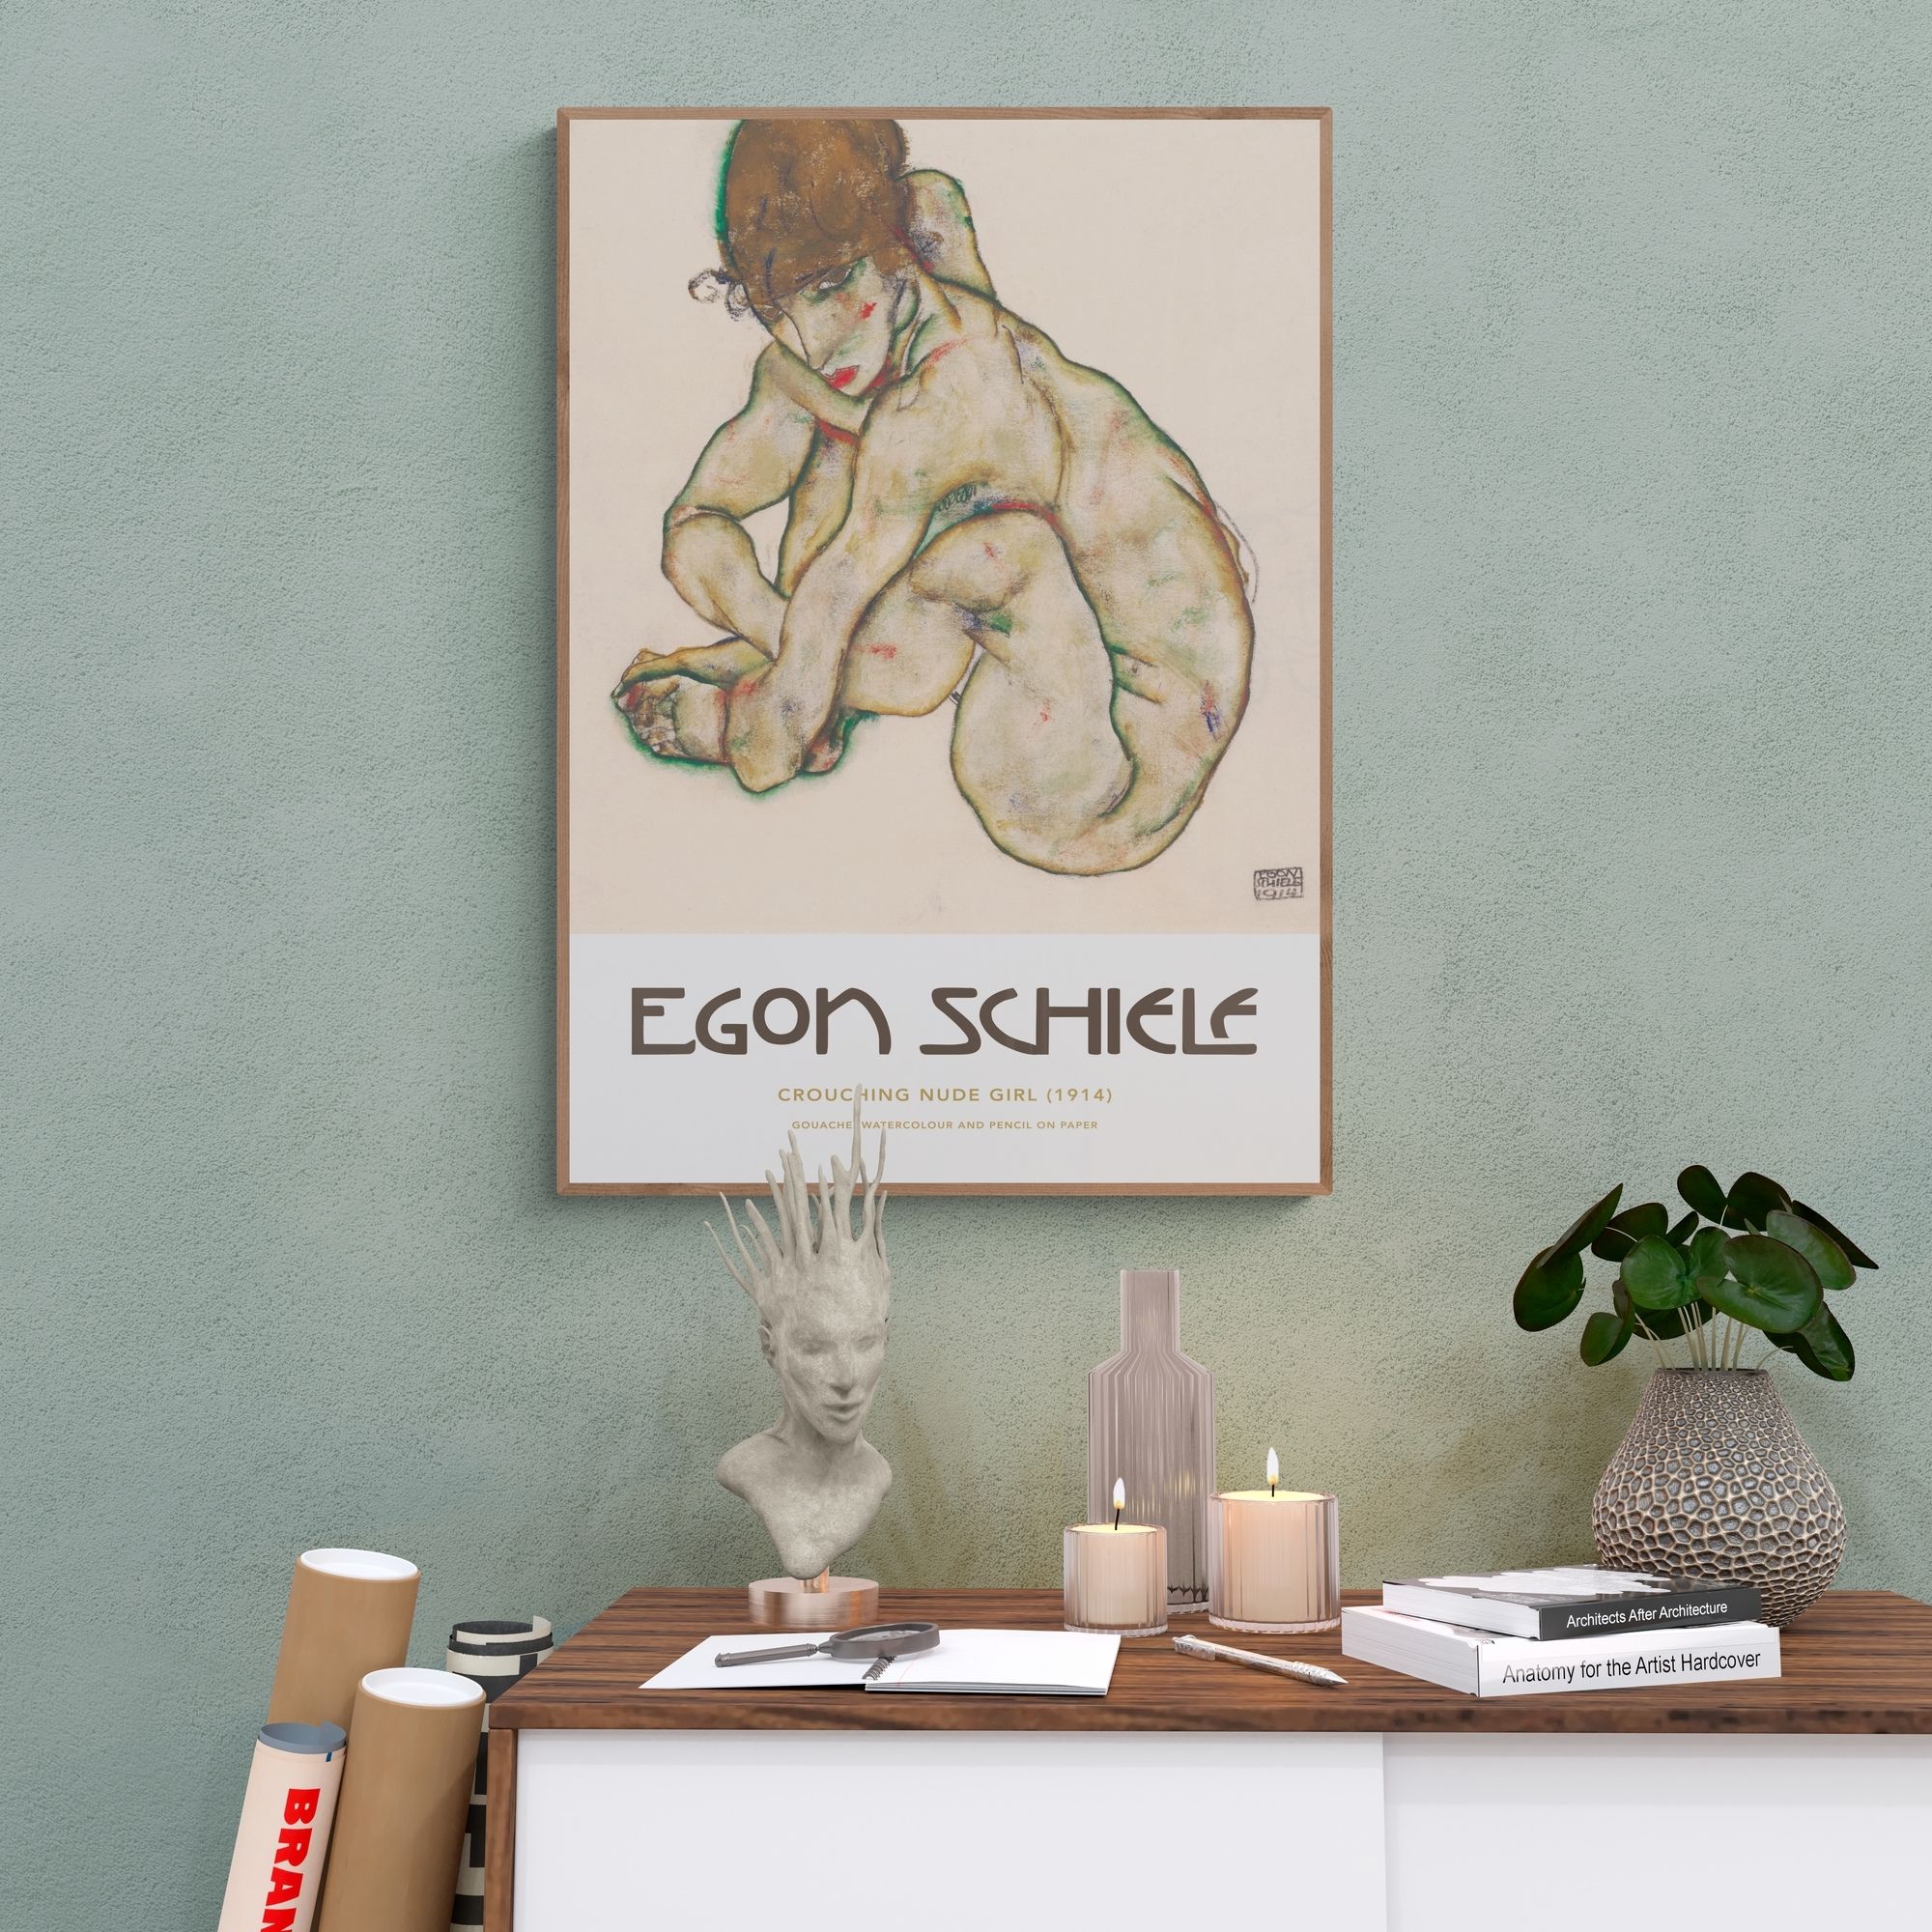 Egon Schiele 1914 Poster - 'Crouching Nude Girl' Artwork with Dynamic Pose and Earthy Watercolor Tones, Highlighting Schiele's Signature Drawing Style